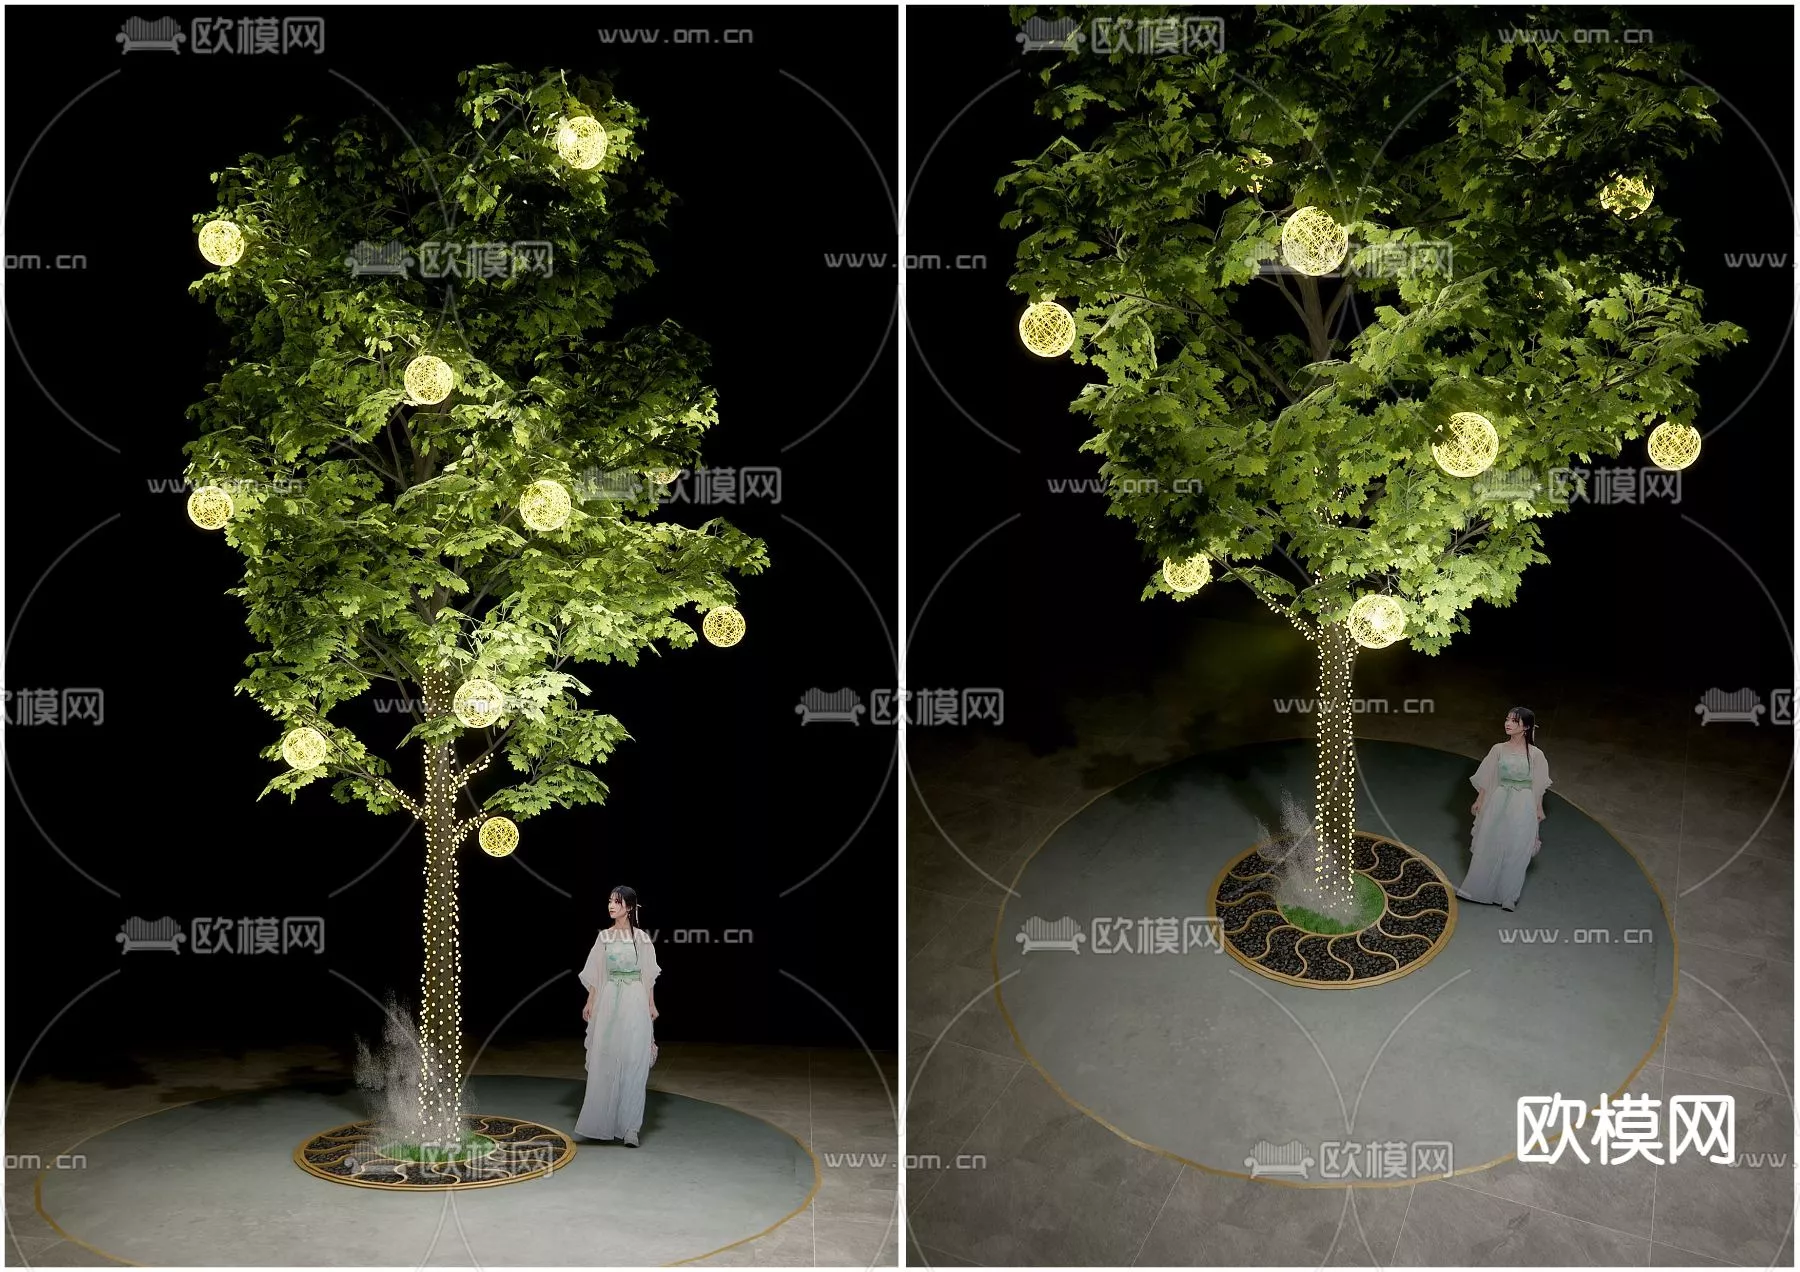 MODERN TREE - SKETCHUP 3D MODEL - VRAY OR ENSCAPE - ID15402